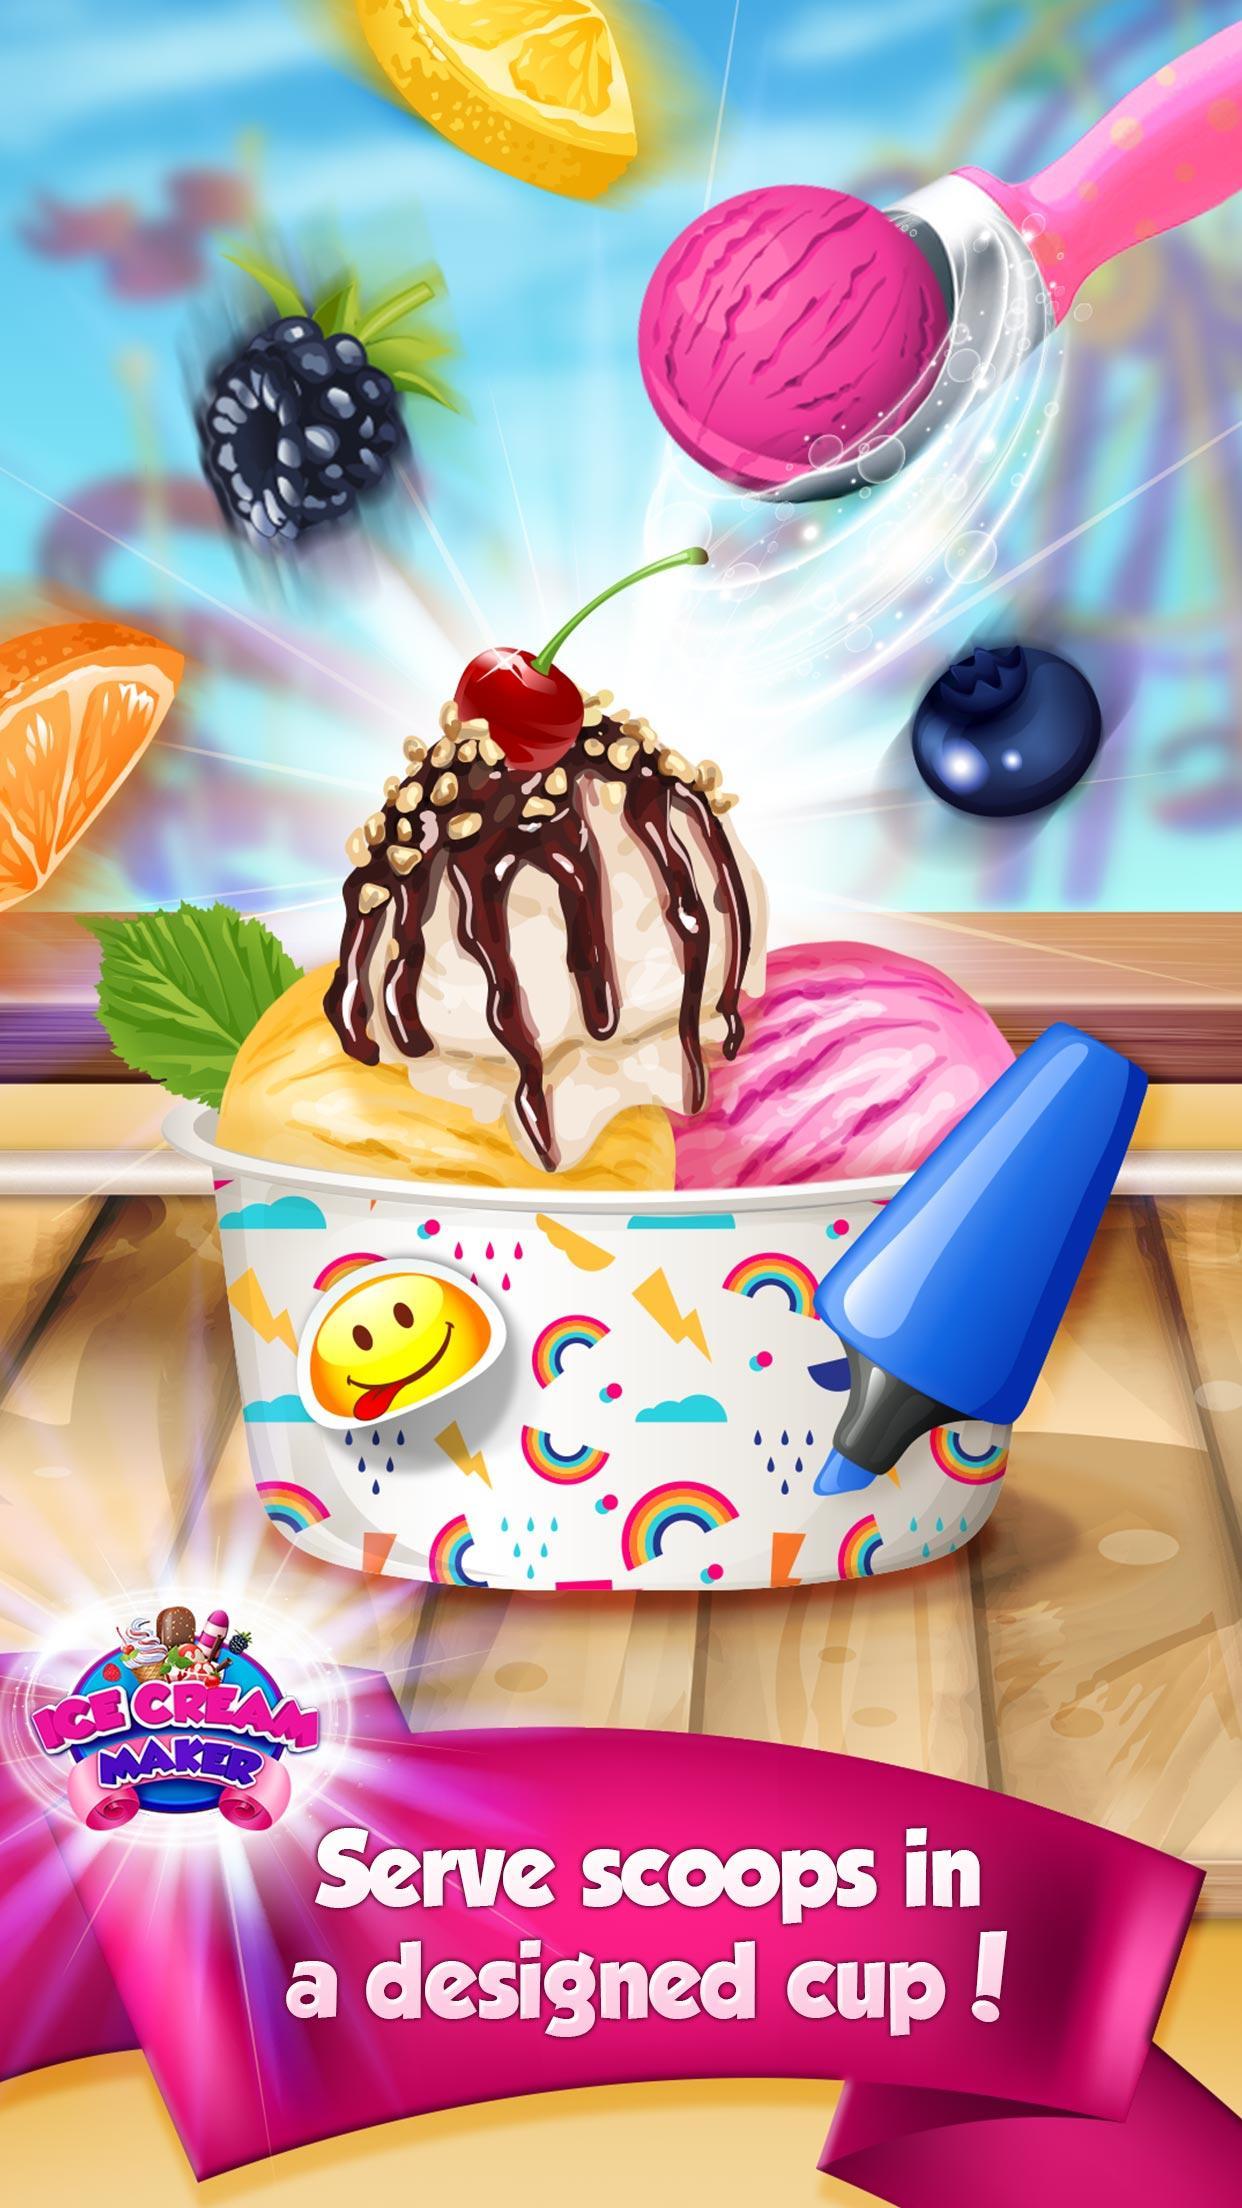 ice cream and cake games for ios download free